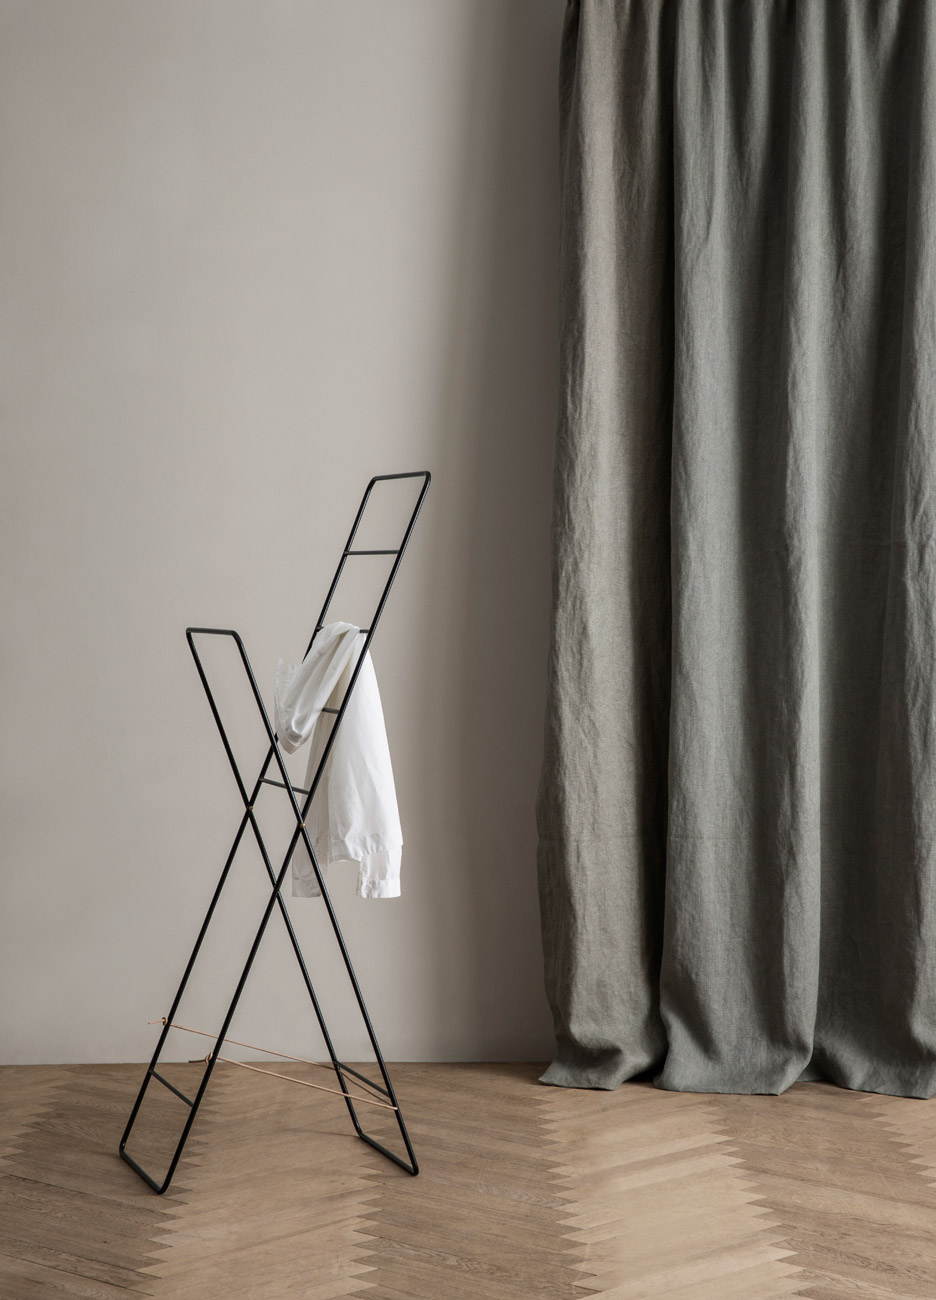 Ferm Living Spring Summer 2016 collection